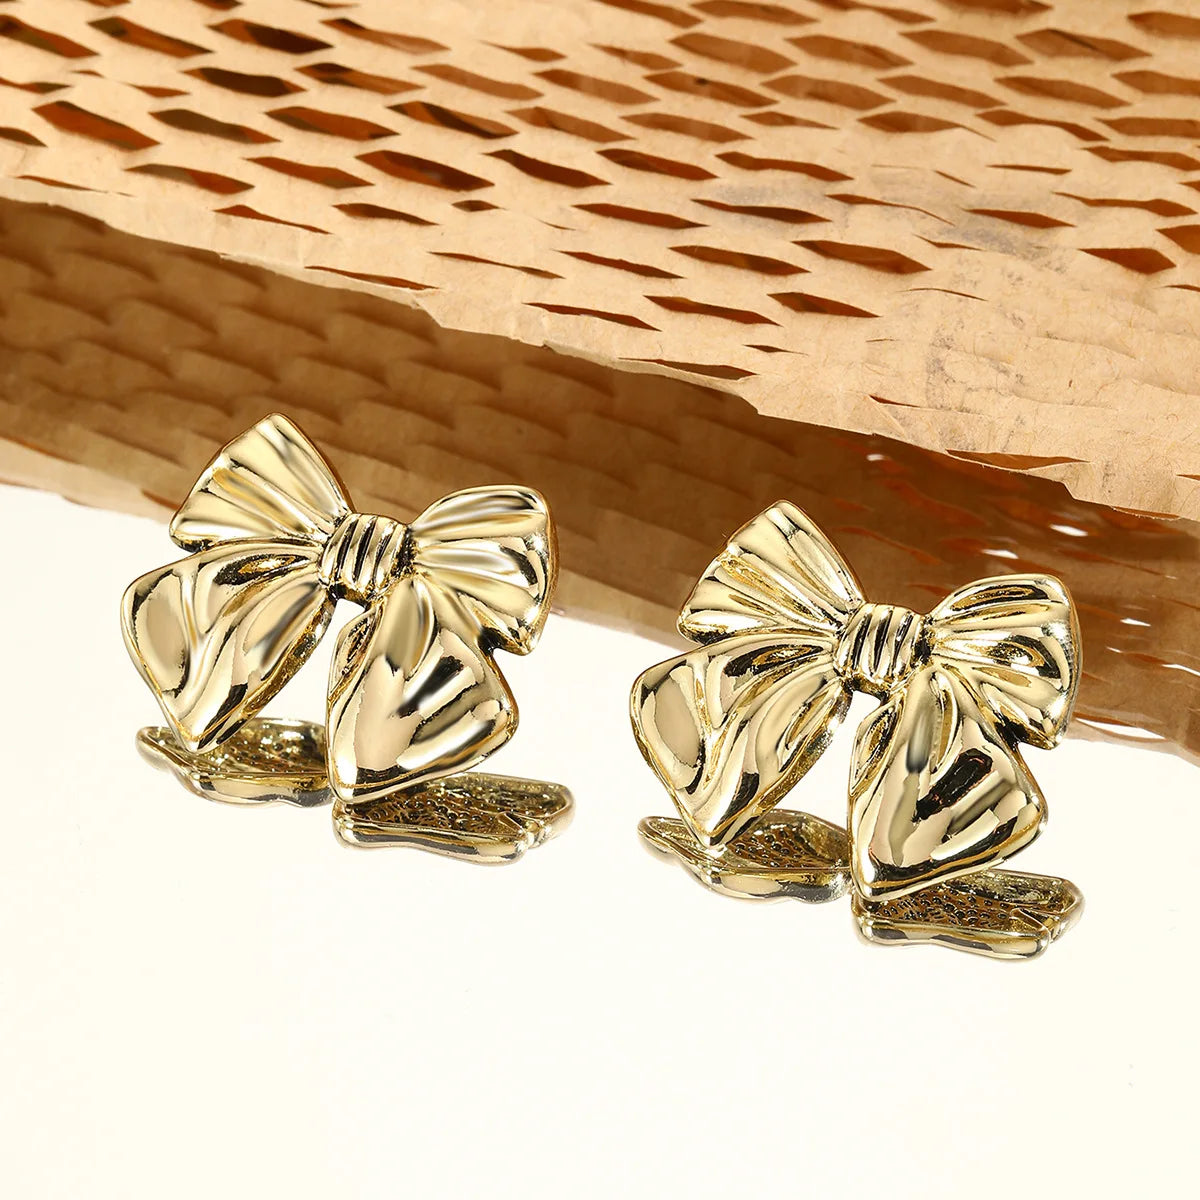 1 Pair Stainless Steel Metal Ribbon Bow Stud Earrings for Women Girls18K Gold Plated Cute Statement Piercing  Jewelry Set Gift